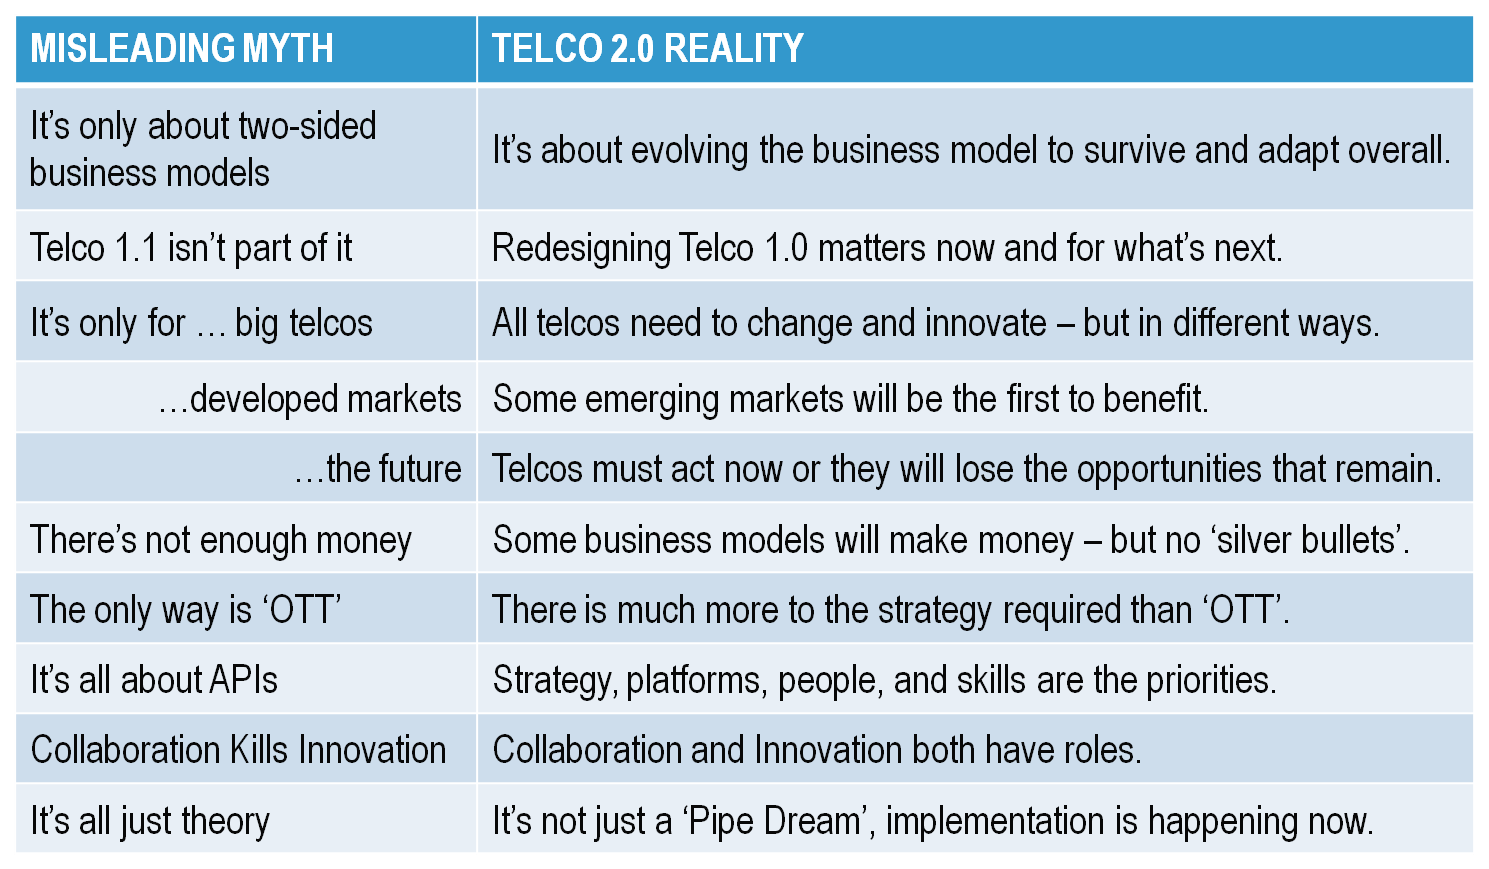 Misleading Myths and Realities of Telco 2.0